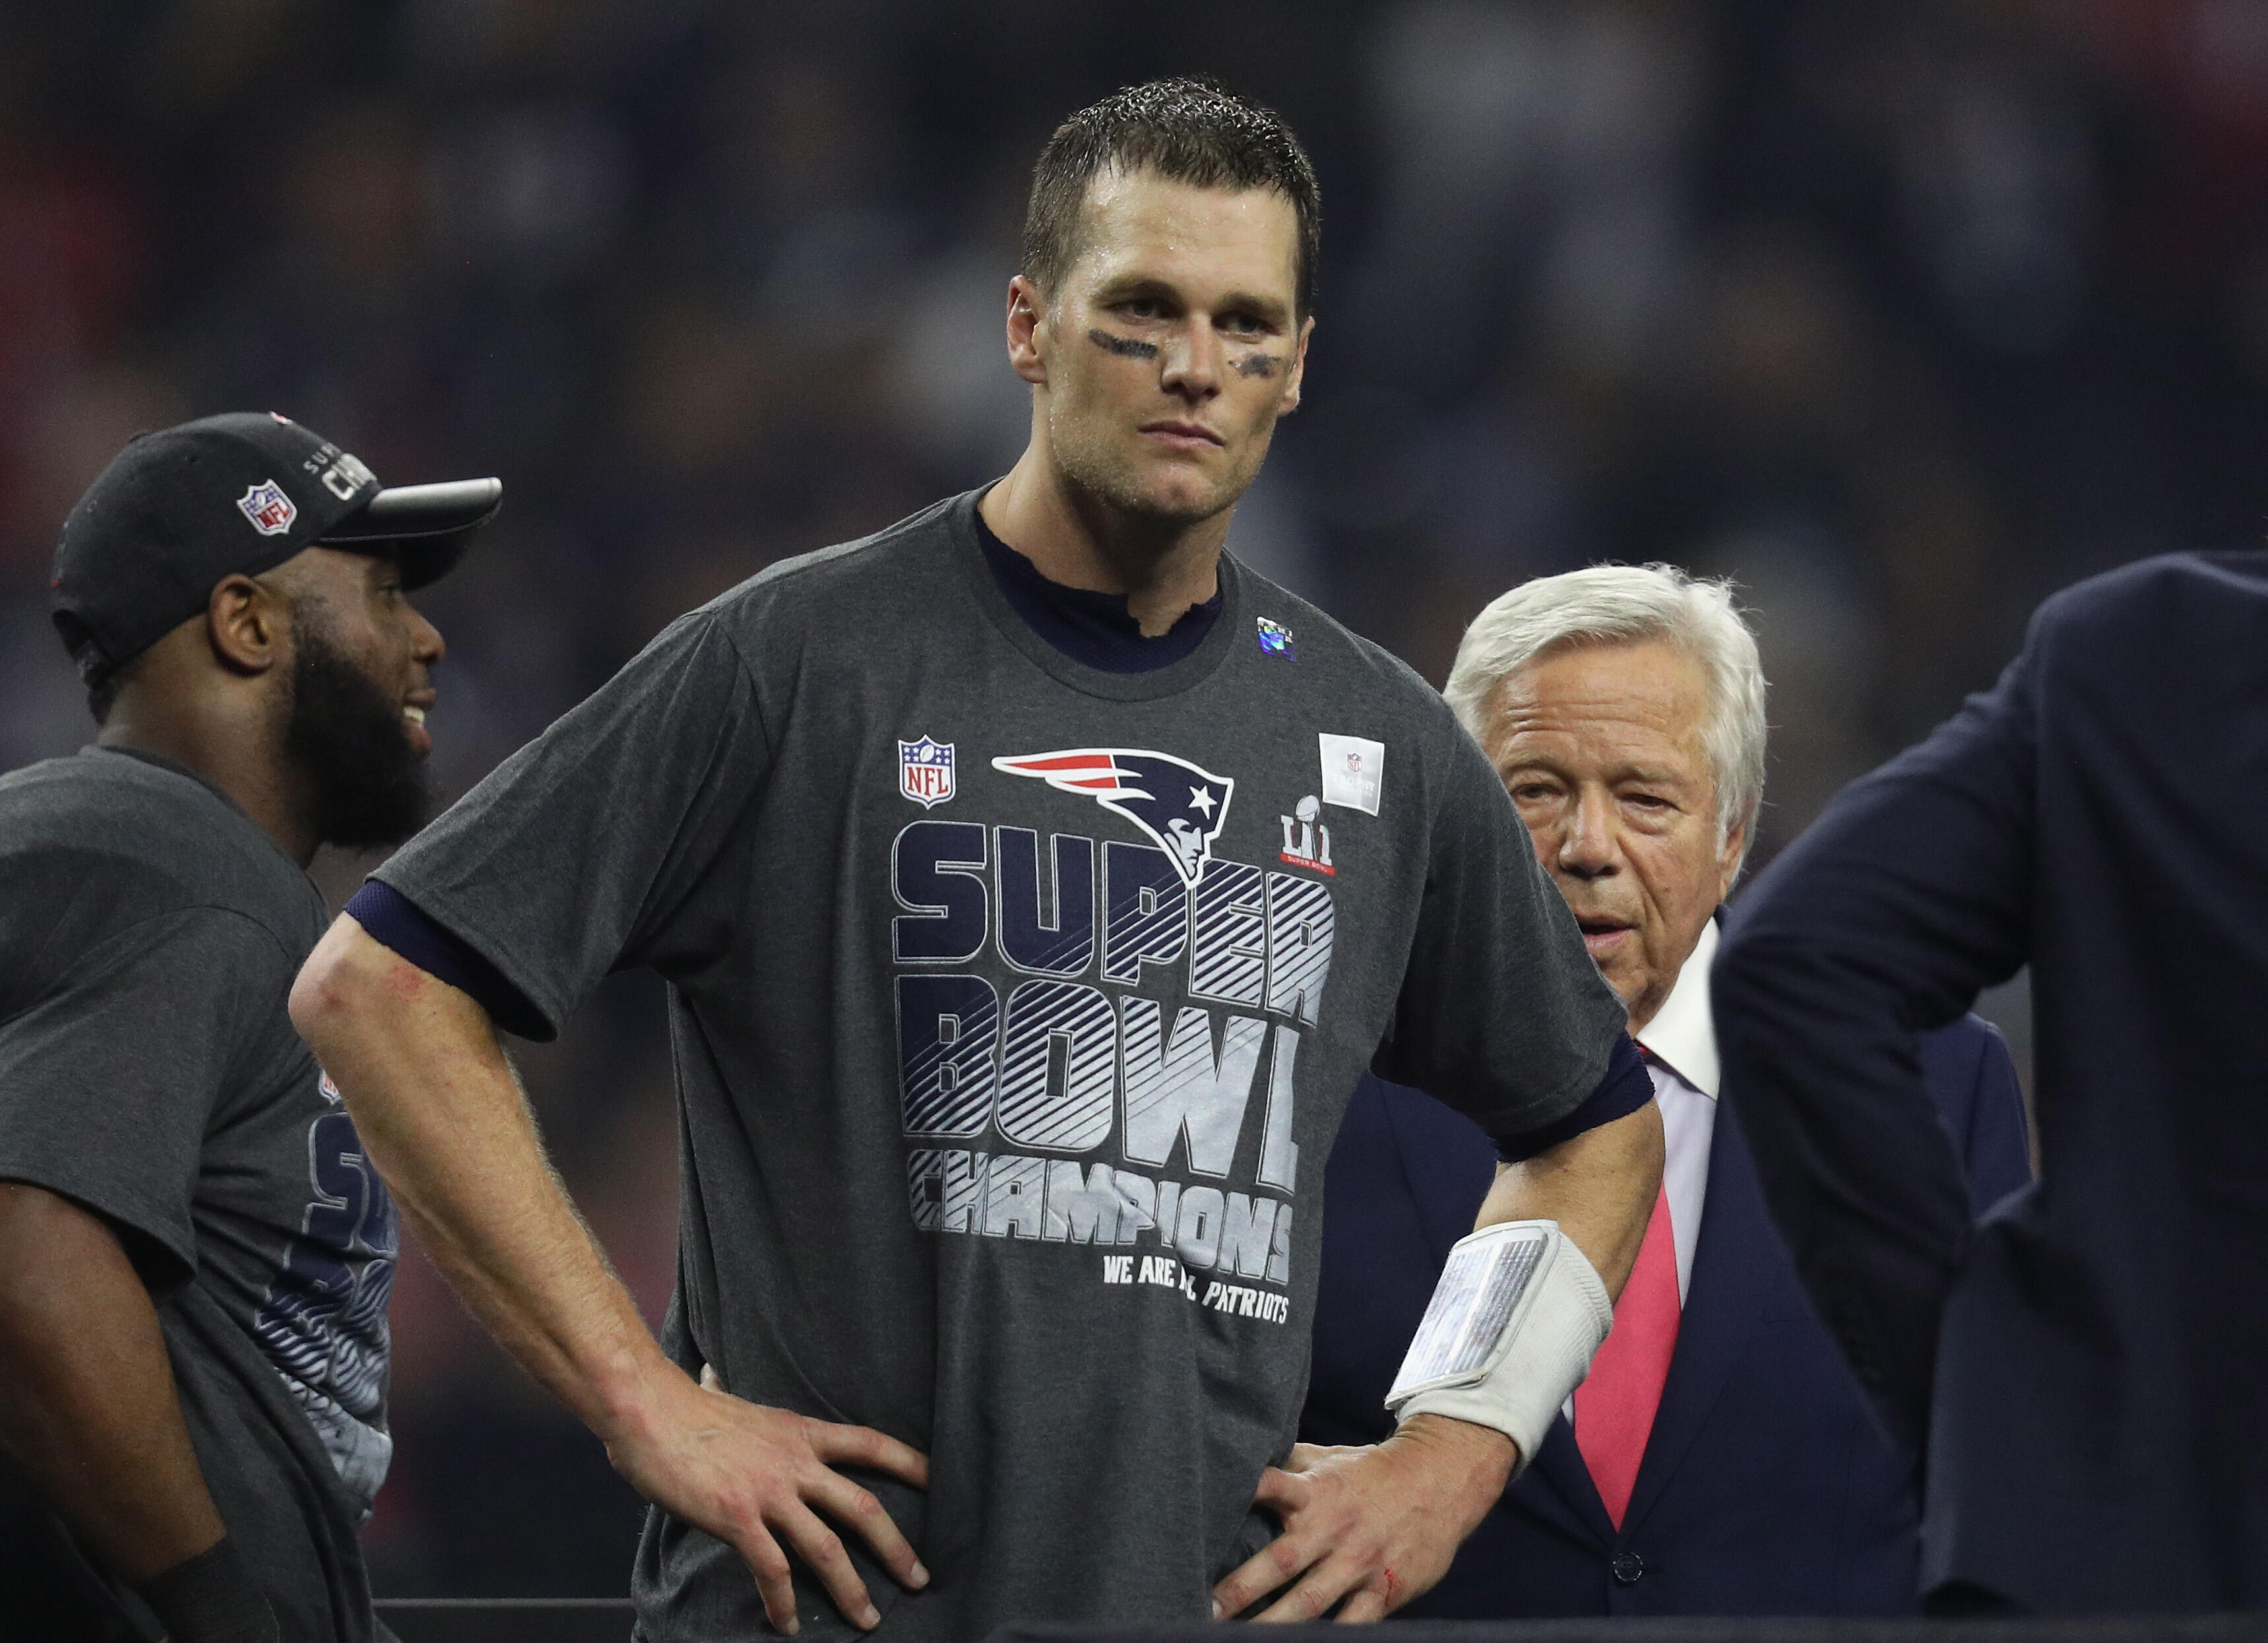 HOUSTON, TX - FEBRUARY 05: Tom Brady #12 of the New England Patriots and New England Patriots owner Robert Kraft look on before the trophy ceremony celebrating the Patriots 34-28 win over the Atlanta Falcons in overtime of Super Bowl 51 at NRG Stadium on 